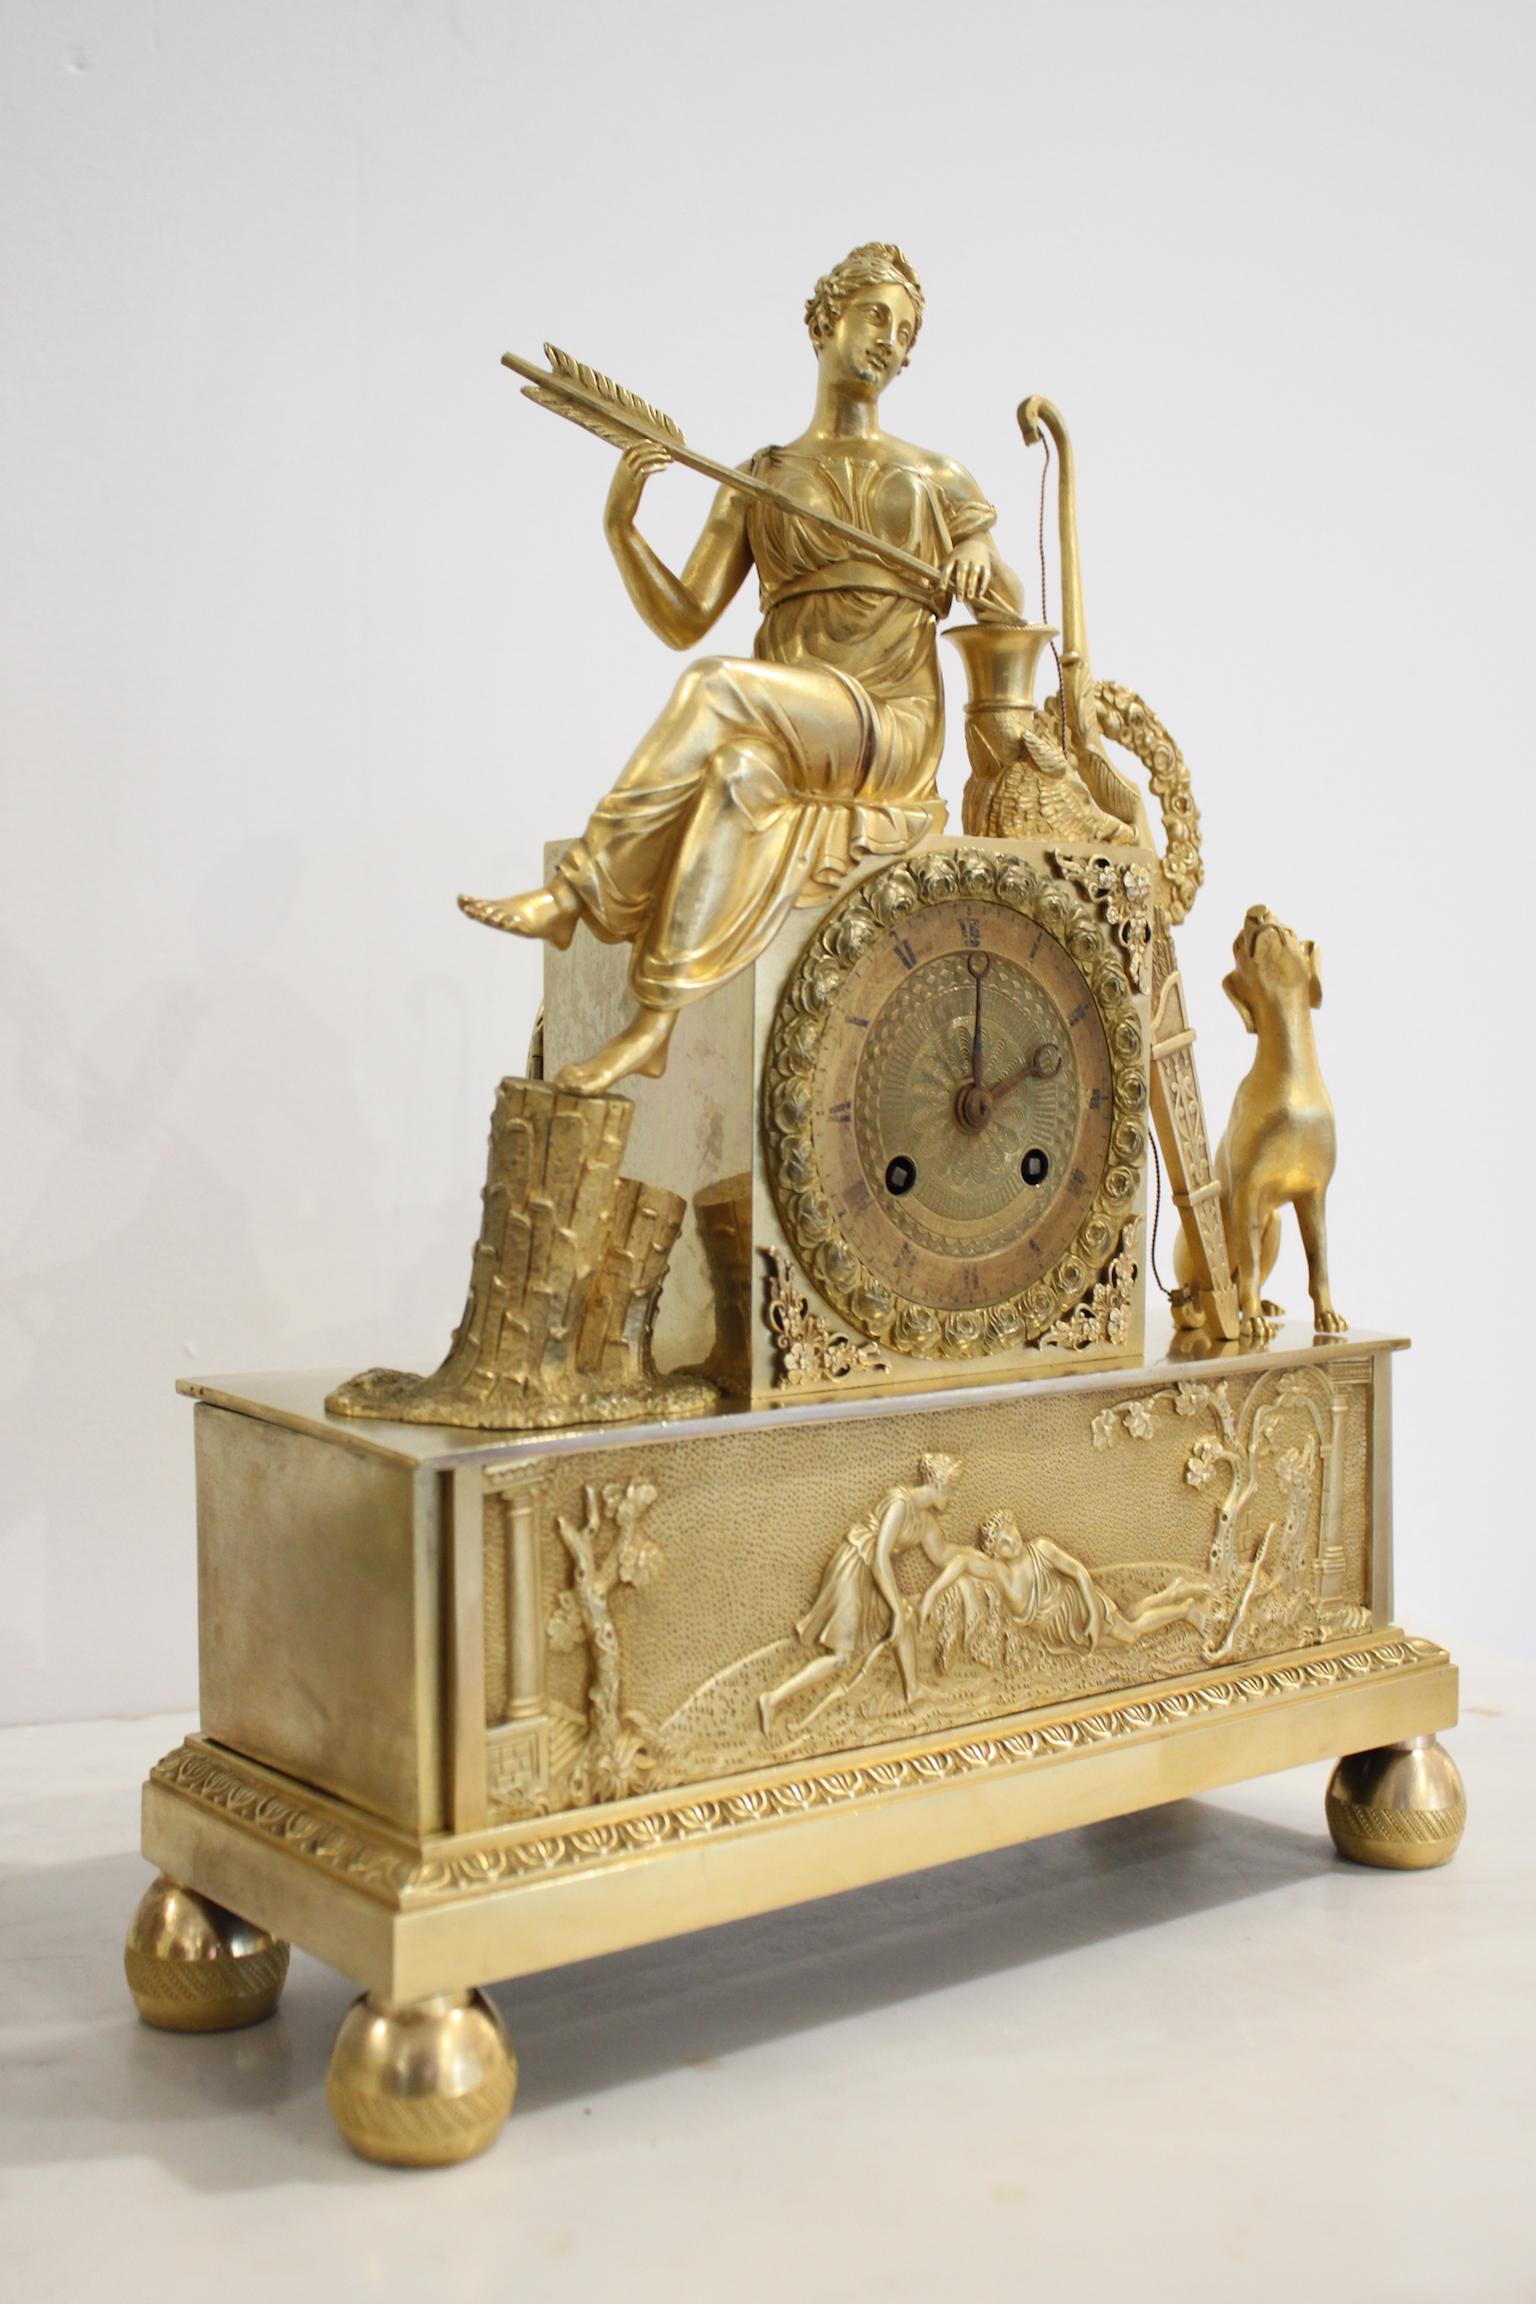 French restoration gilt bronze clock representing an allegory of hunt. In working order.
Dimensions: width 28cm, height 36cm, depth 11cm.